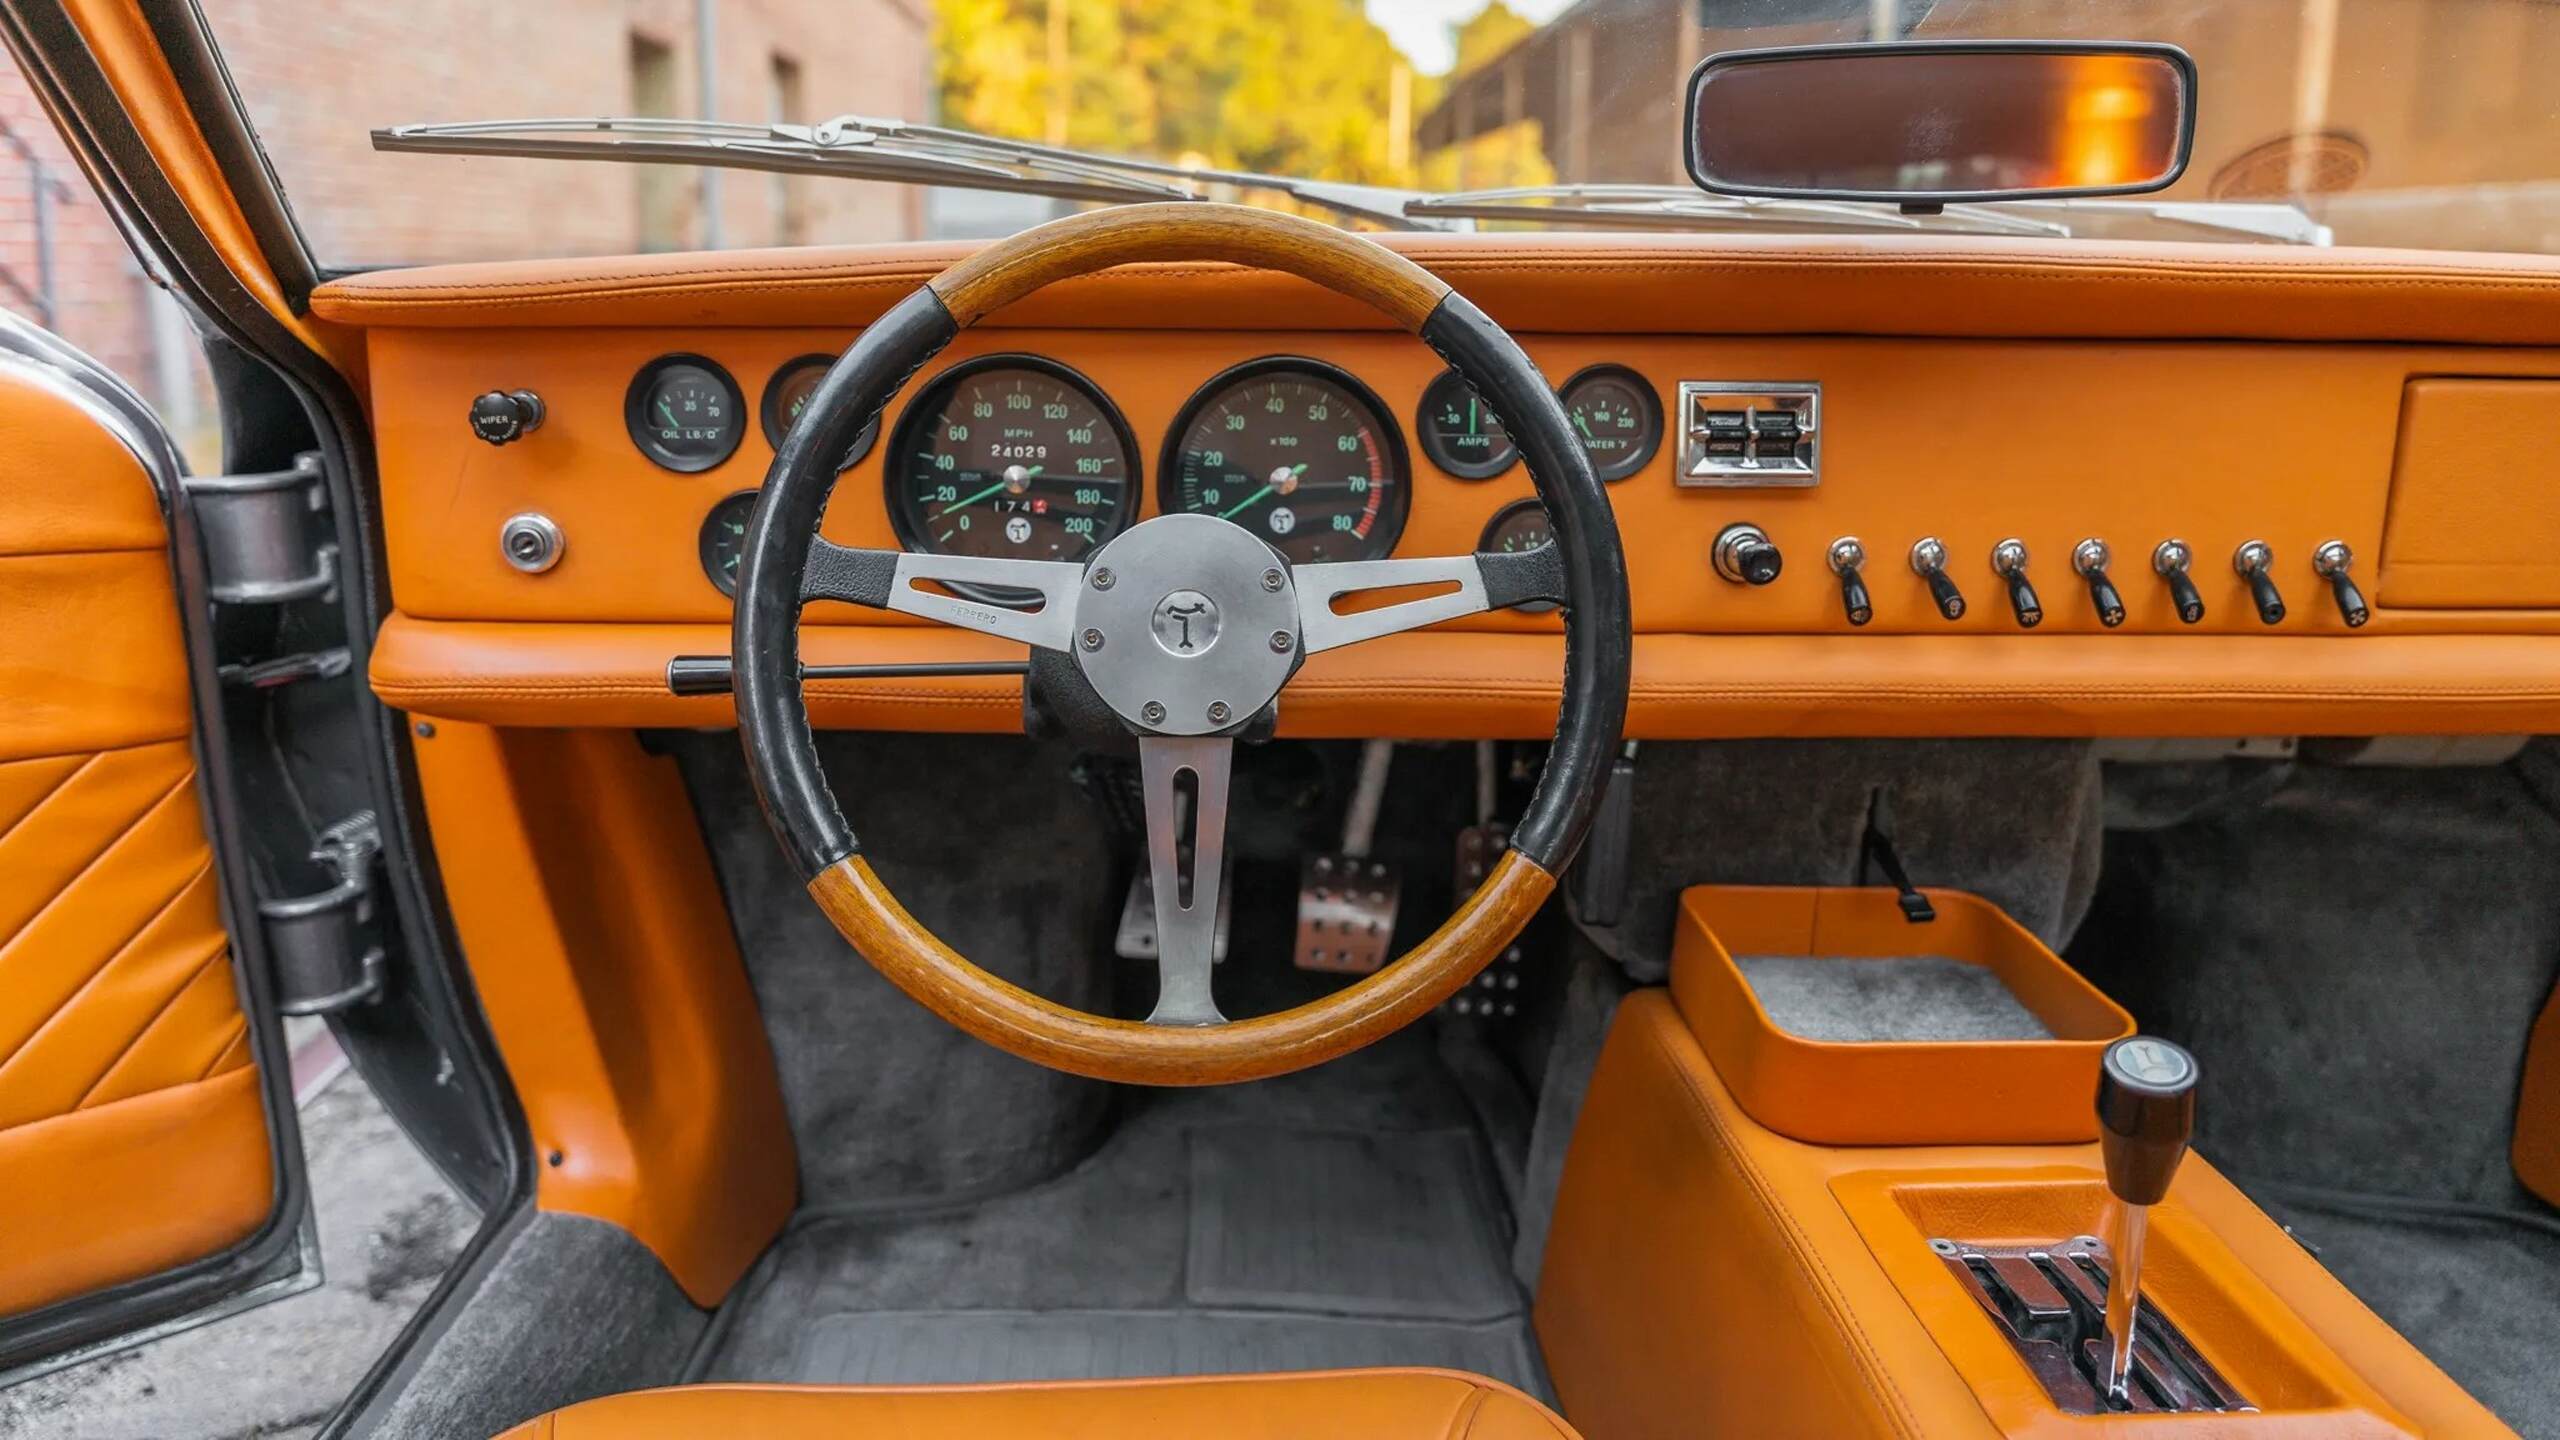 The Steering Wheel, Dashboard, And Center Console Of The 1969 DeTomaso Mangusta